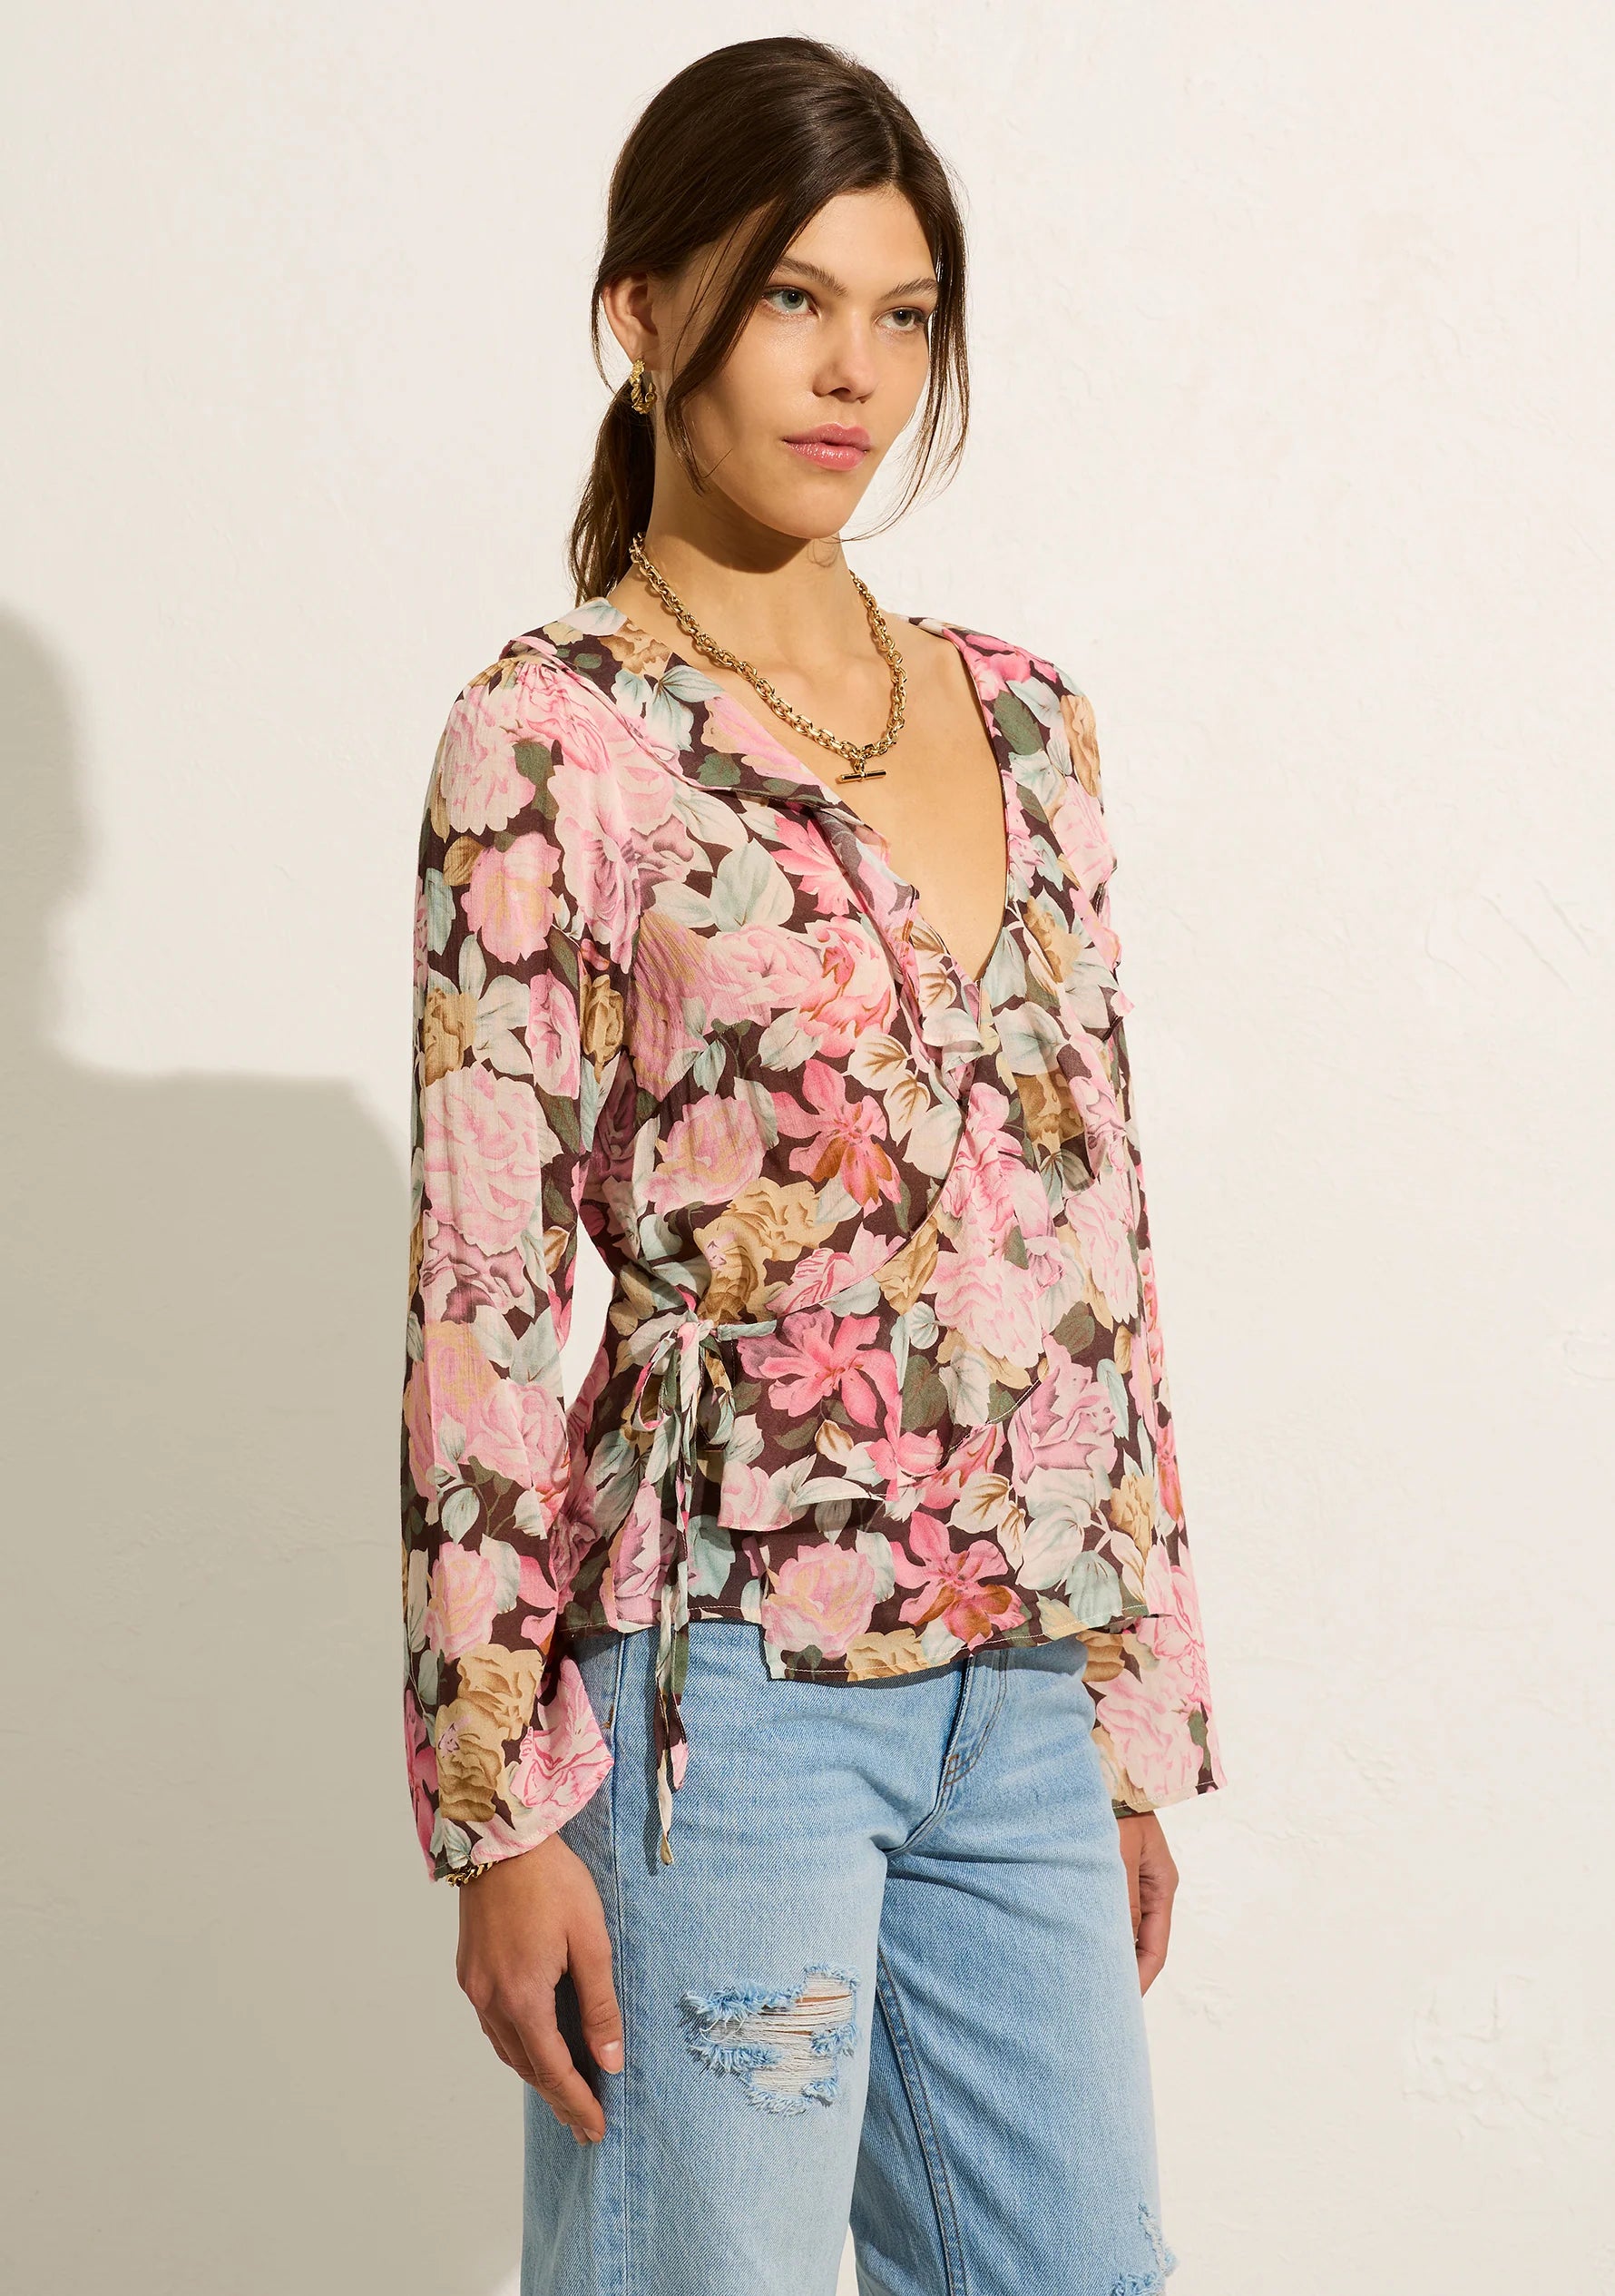 The Sophia Elda Wrap Blouse is crafted from a cotton blend in our feminine blush floral. Featuring a functional wrap design, a V neckline with ruffle details and a choir boy sleeve.